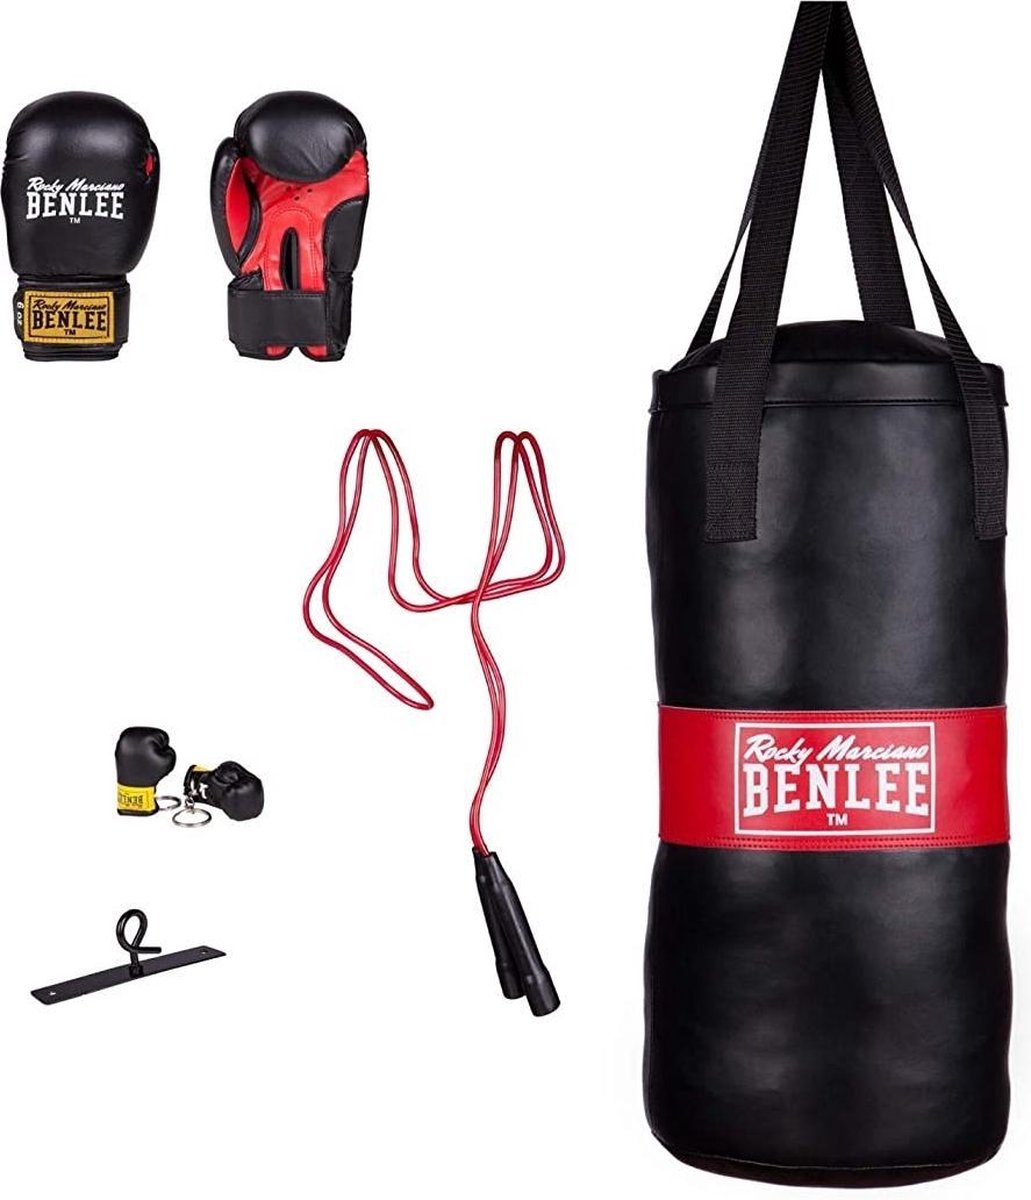 Topquality BENLEE Rocky Marciano Unisex Punchy vechtsport set thaibox